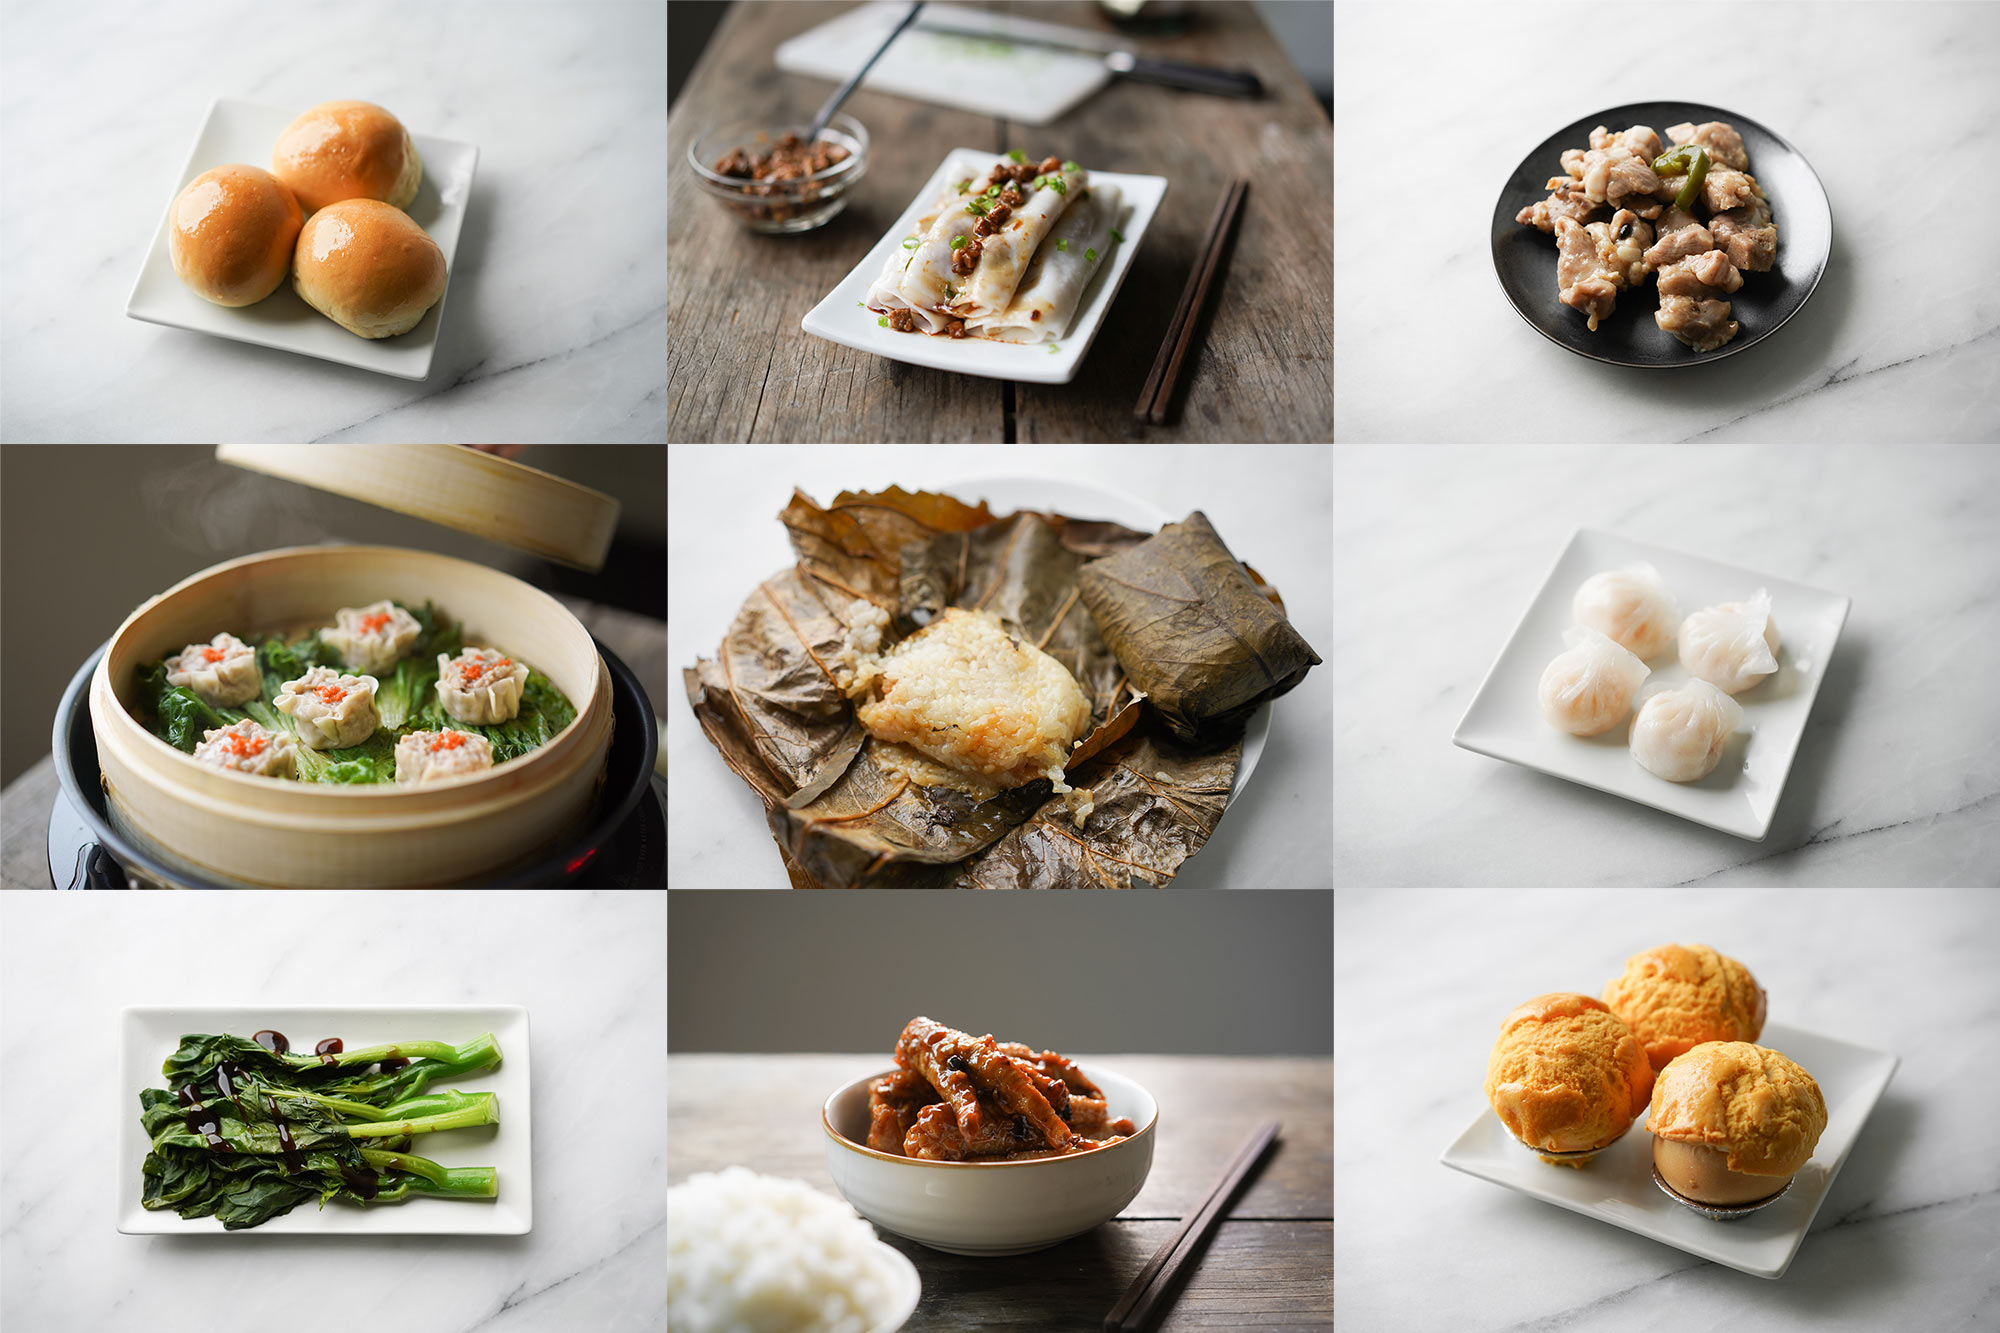 9 dim sum dishes - complete guide